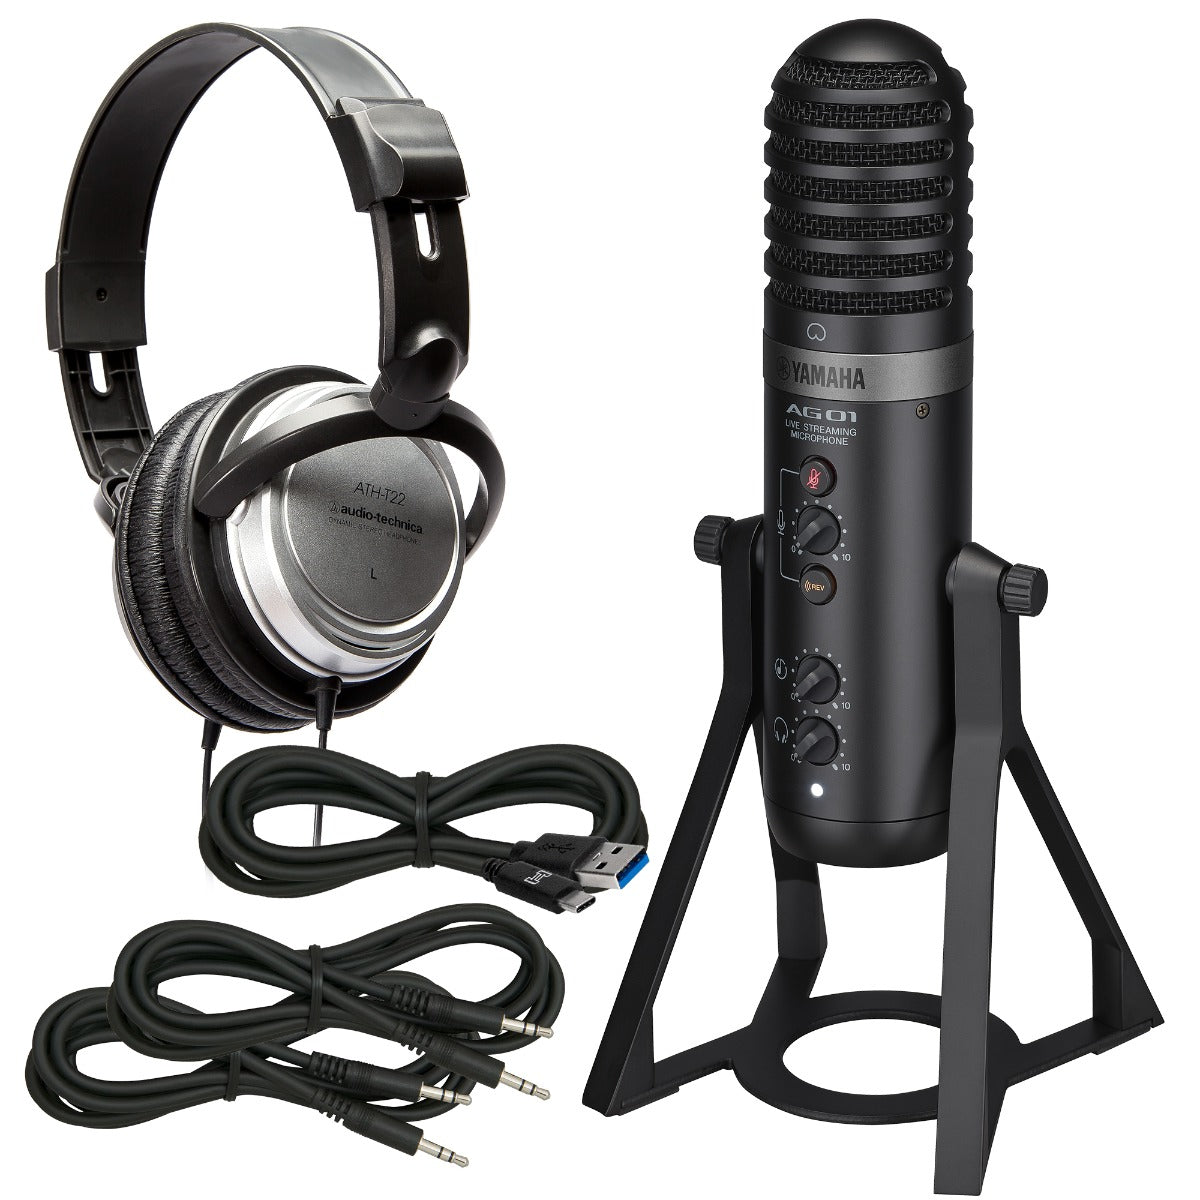 Collage of the components in the Yamaha AG01 Live Streaming USB Microphone - Black BONUS PAK bundle